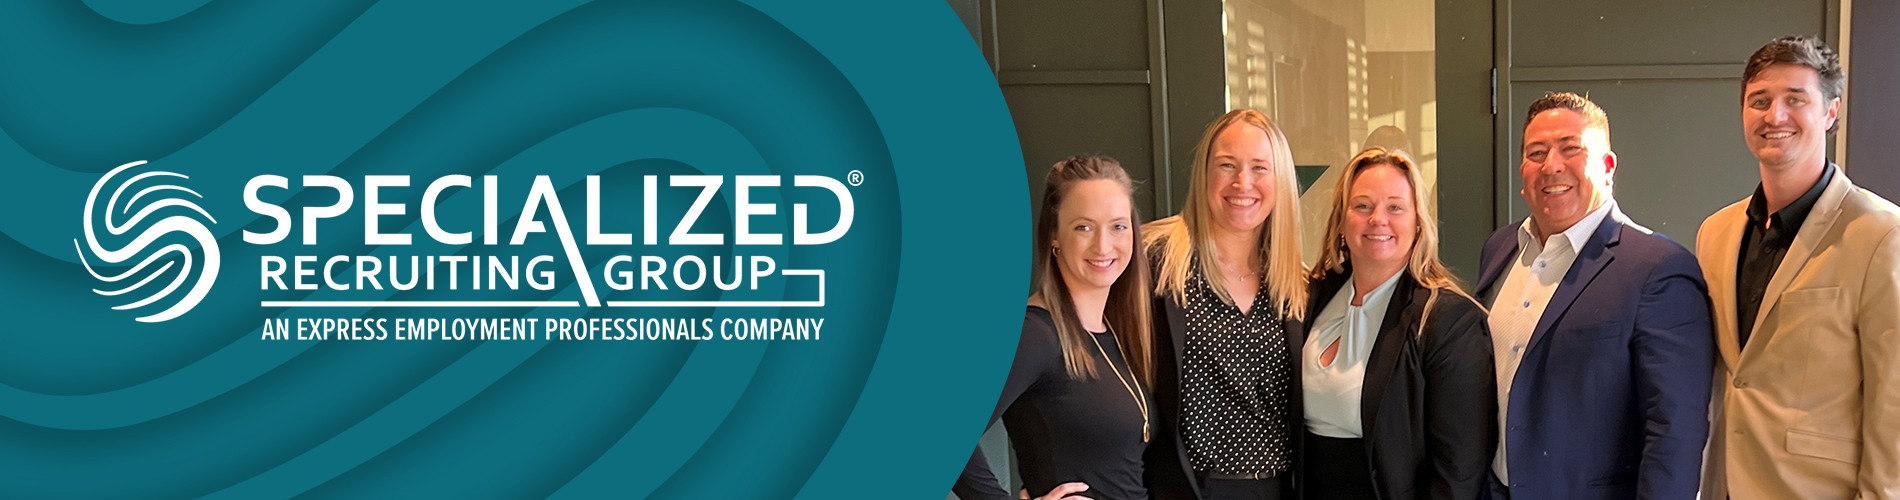 Meet the Group - Professional Recruiters in Portland, Oregon